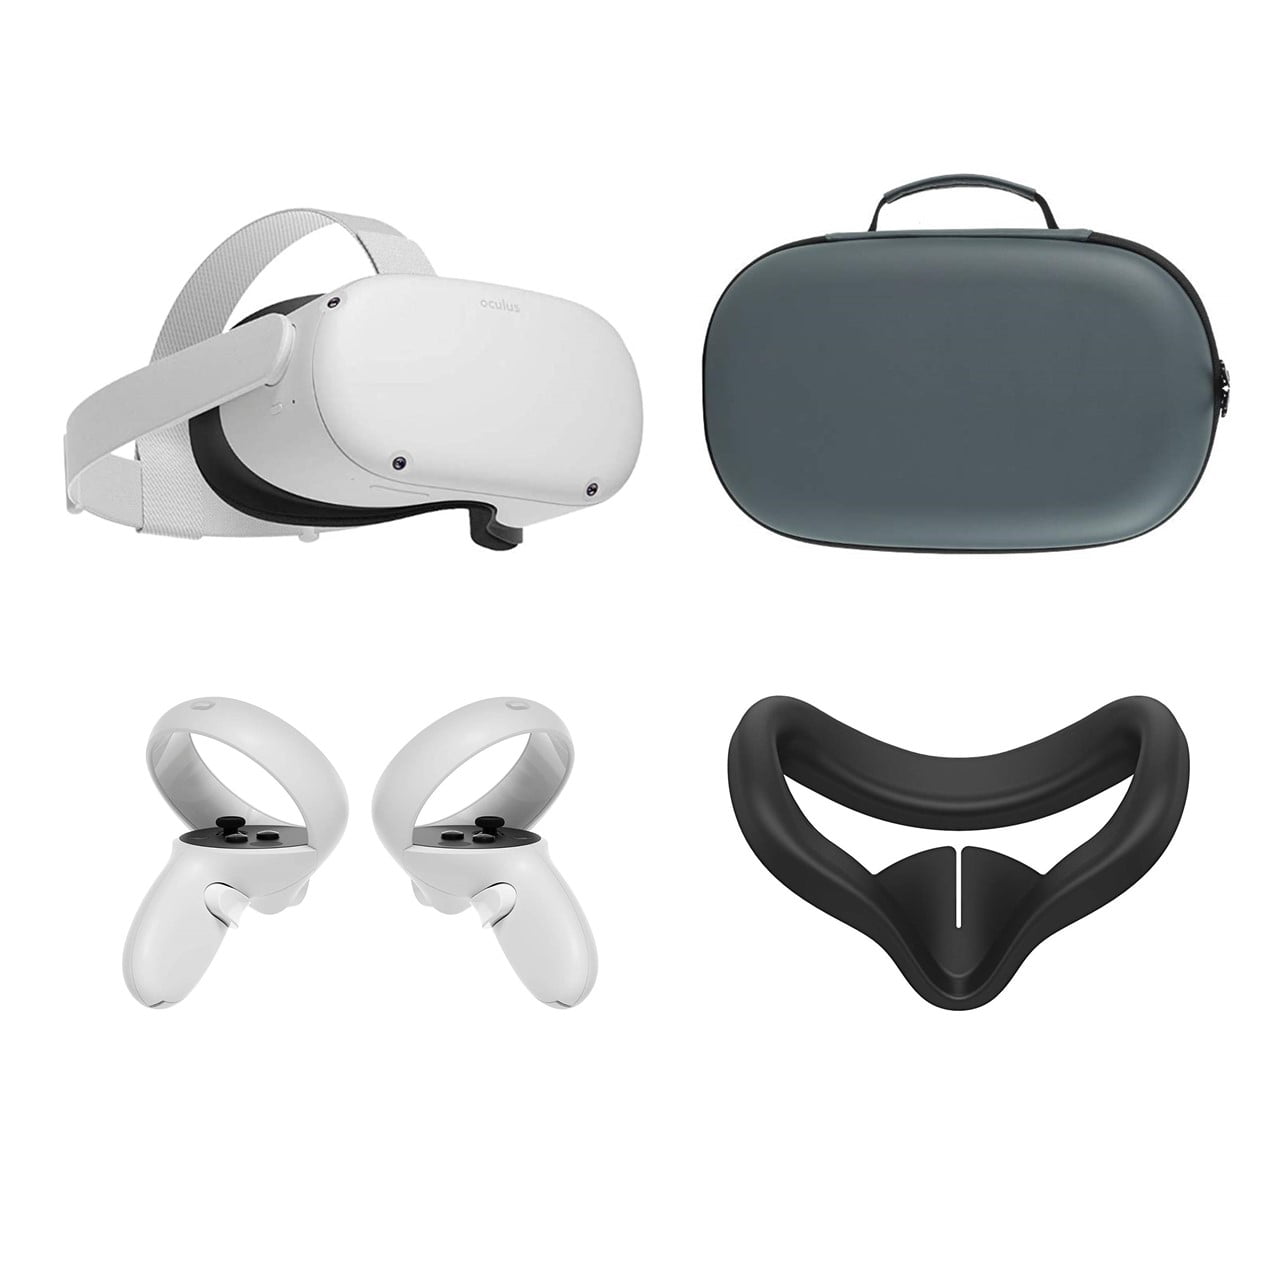 PC/タブレット PC周辺機器 2021 Oculus Quest 2 All-In-One VR Headset 128GB, Touch Controllers,  1832x1920 up to 90 Hz Refresh Rate LCD, Glasses Compatible, 3D Audio,  Mytrix 